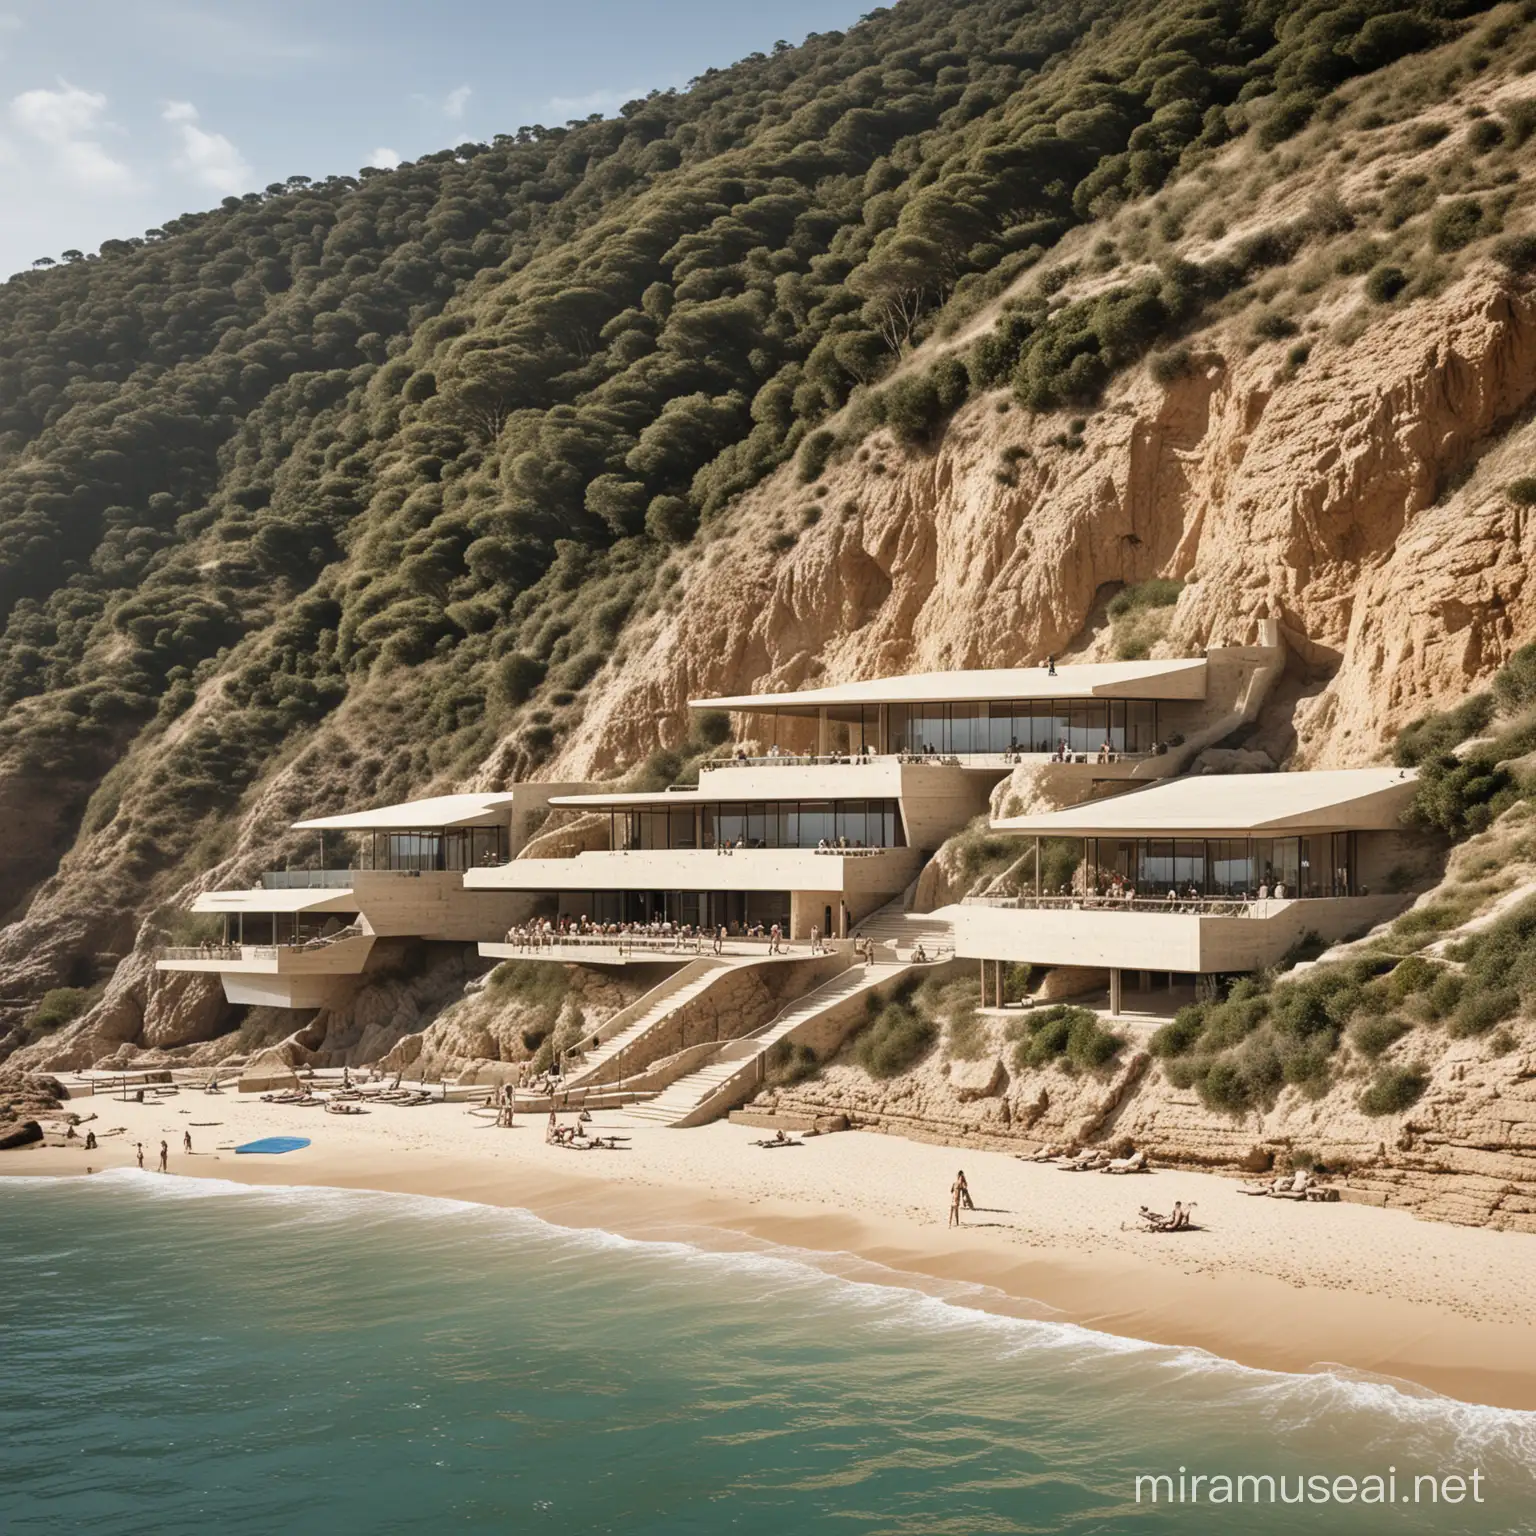 a series of beachfront pavilions built into the side of a steep sloping hill, the pavilions are connected by amphitheatre style seating, the upper most level is public realm